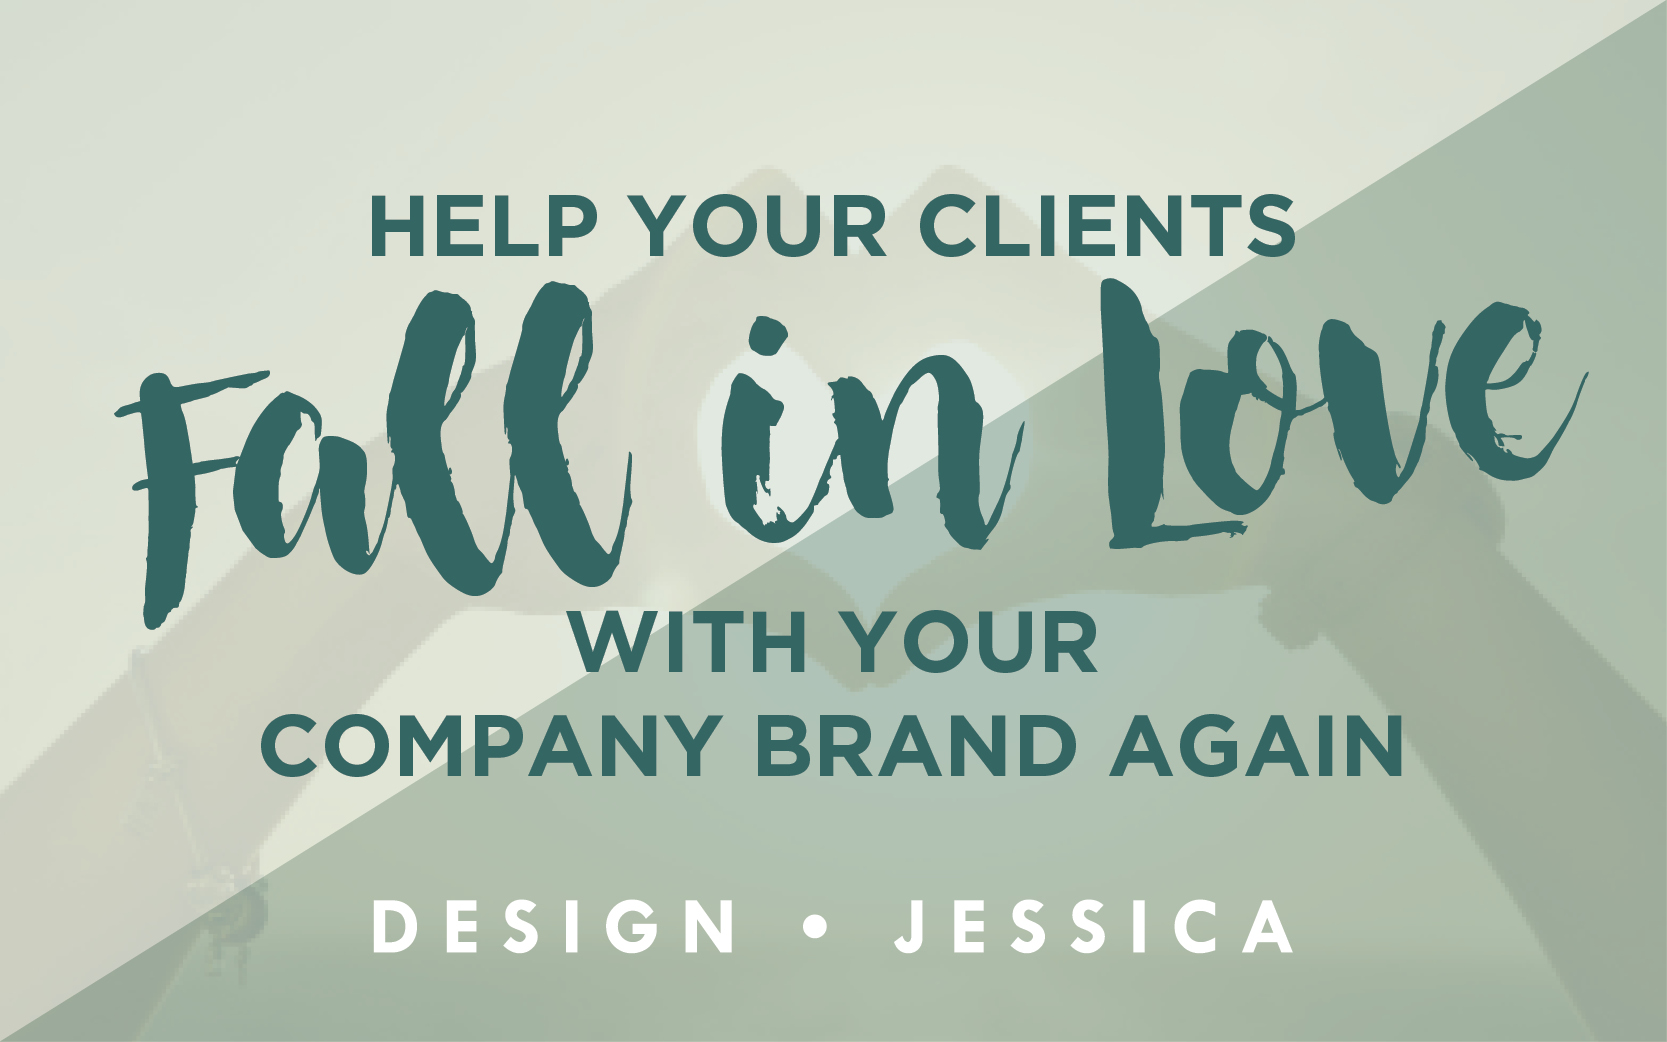 Help Your Clients Fall in Love with your company brand again